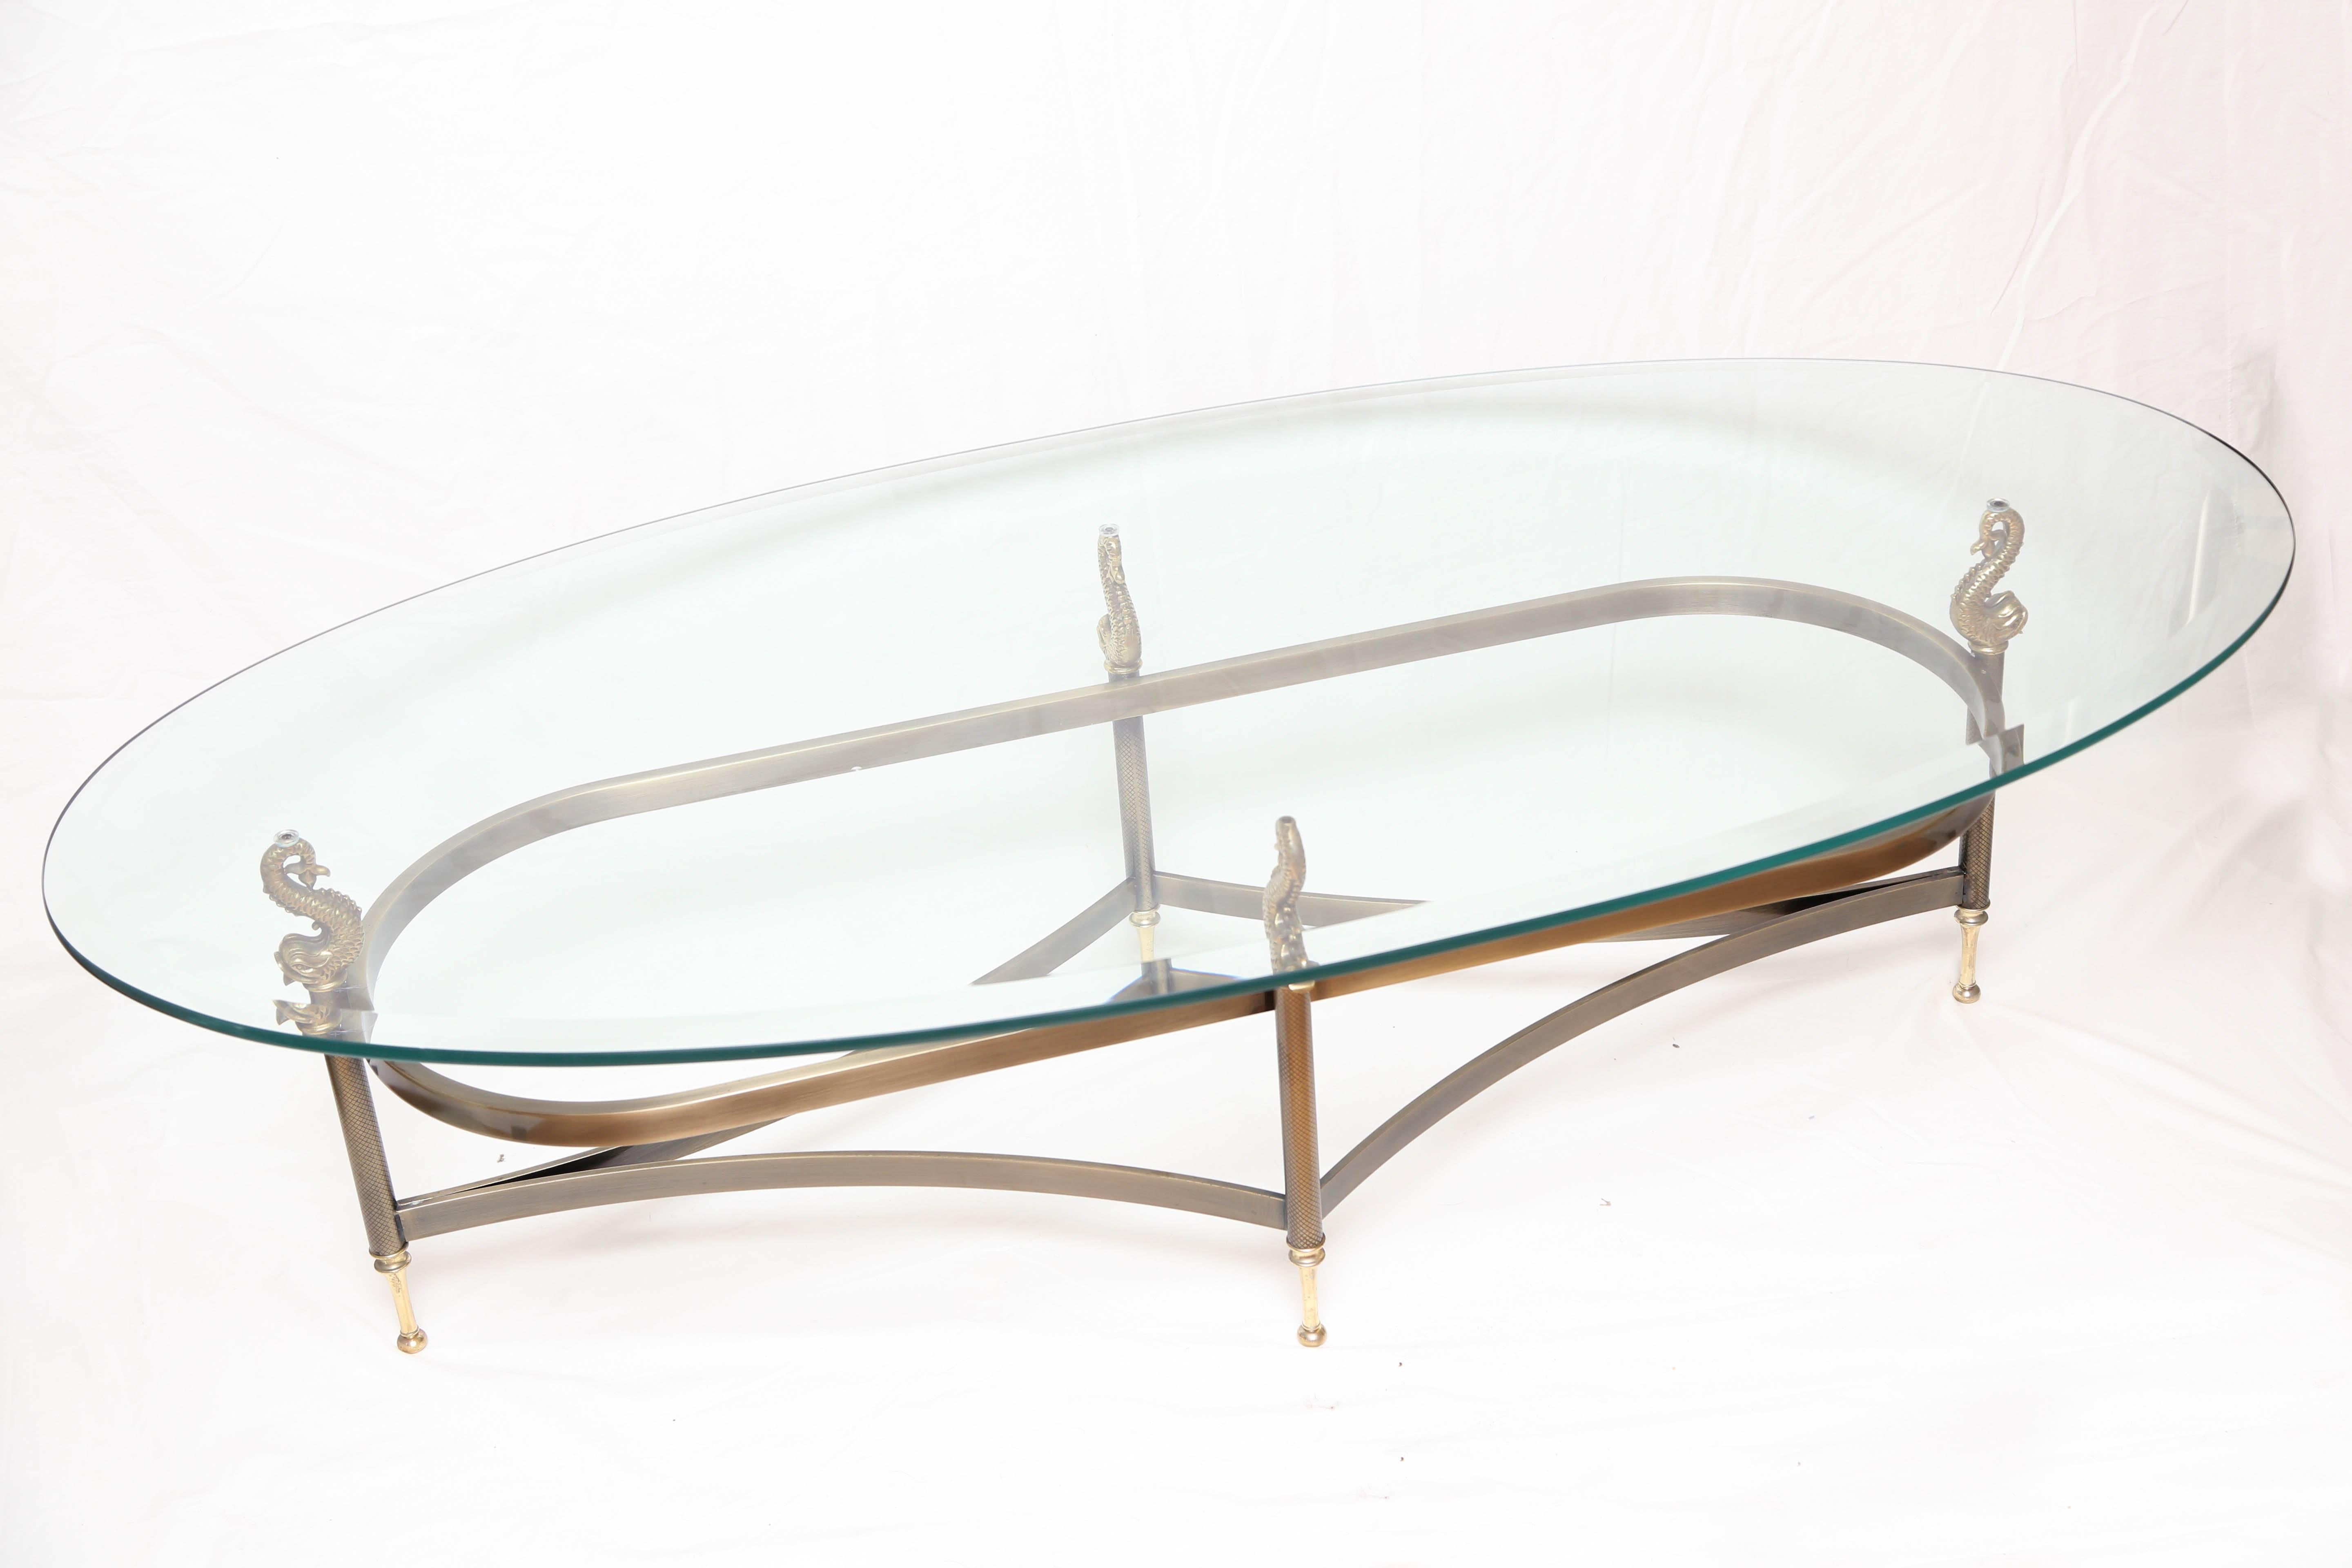 Oval brass base coffee table with four Koi fish supporting the glass top by Design Institute of America.